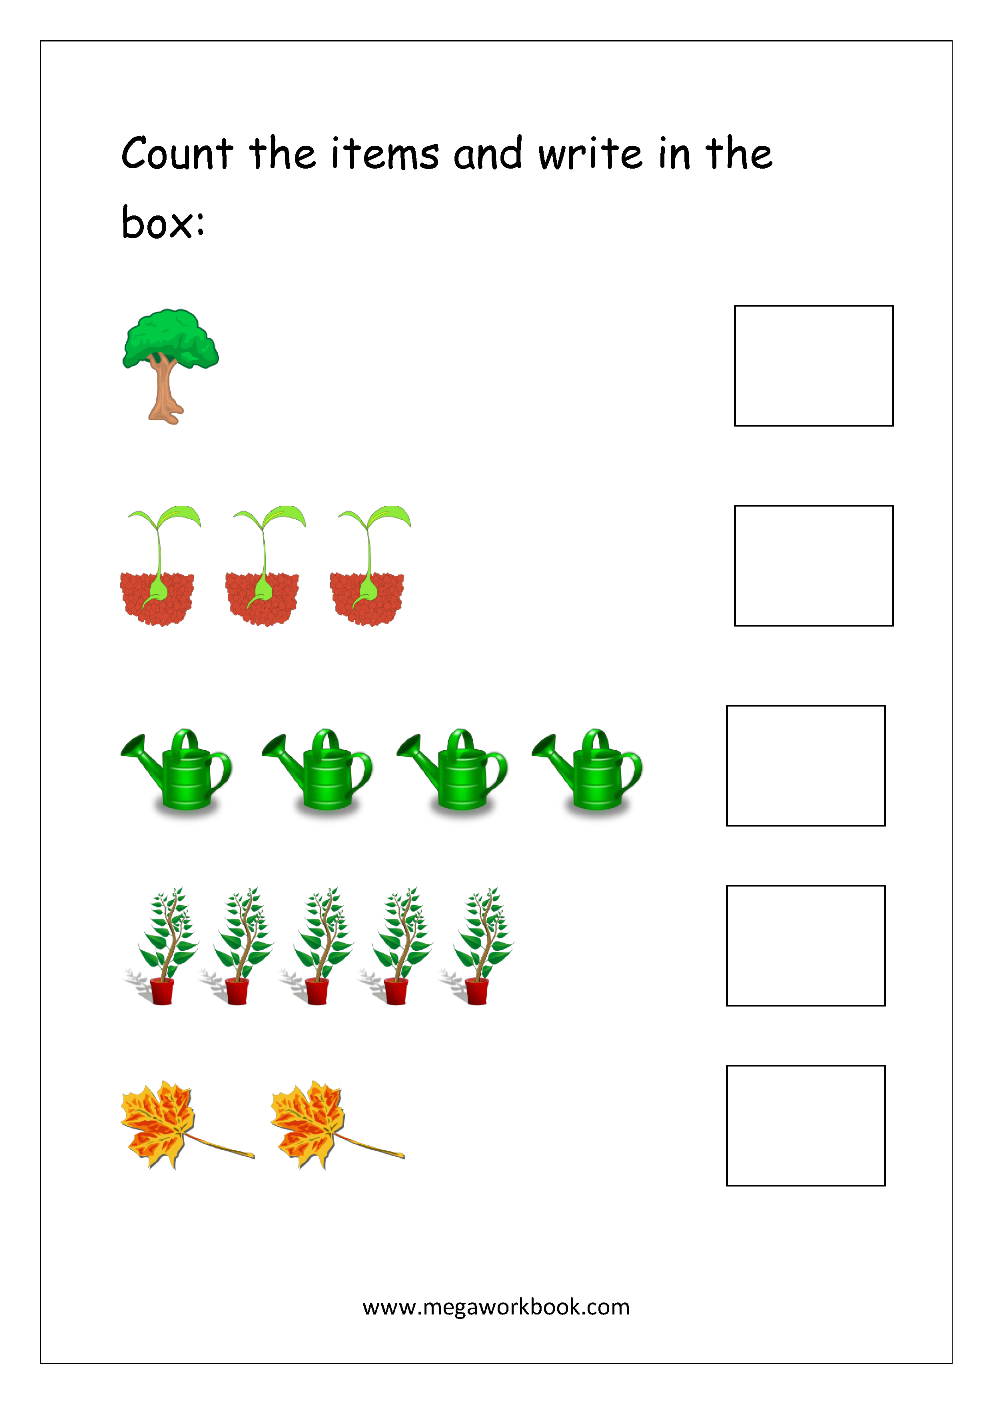 Free Printable Number Counting Worksheets - Count and Match - Count and